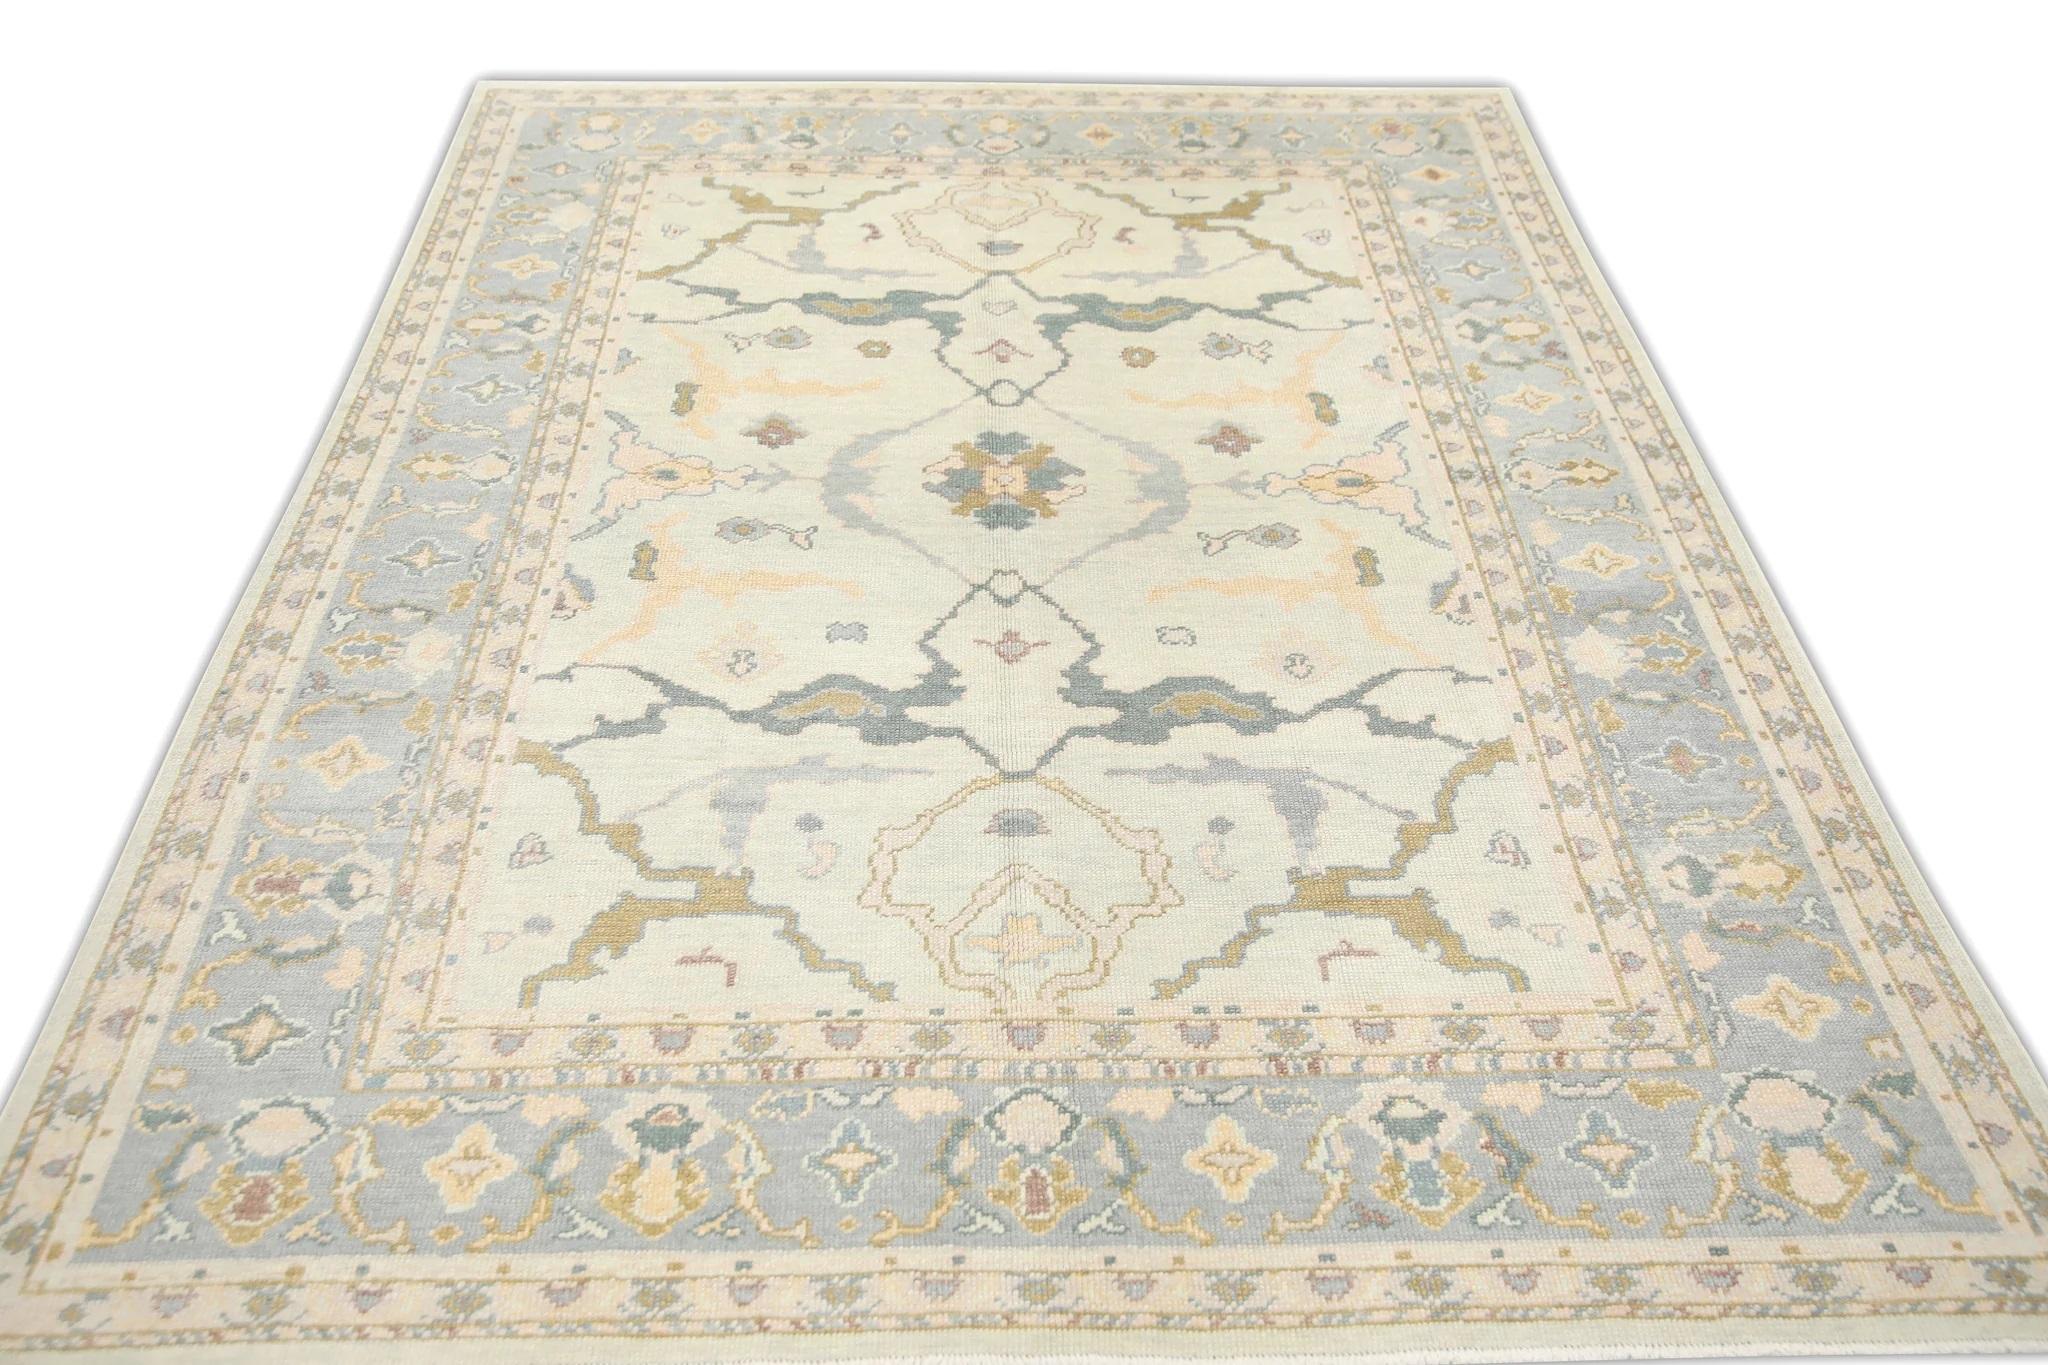 Contemporary Pink & Blue Floral Handwoven Wool Turkish Oushak Rug 6'10